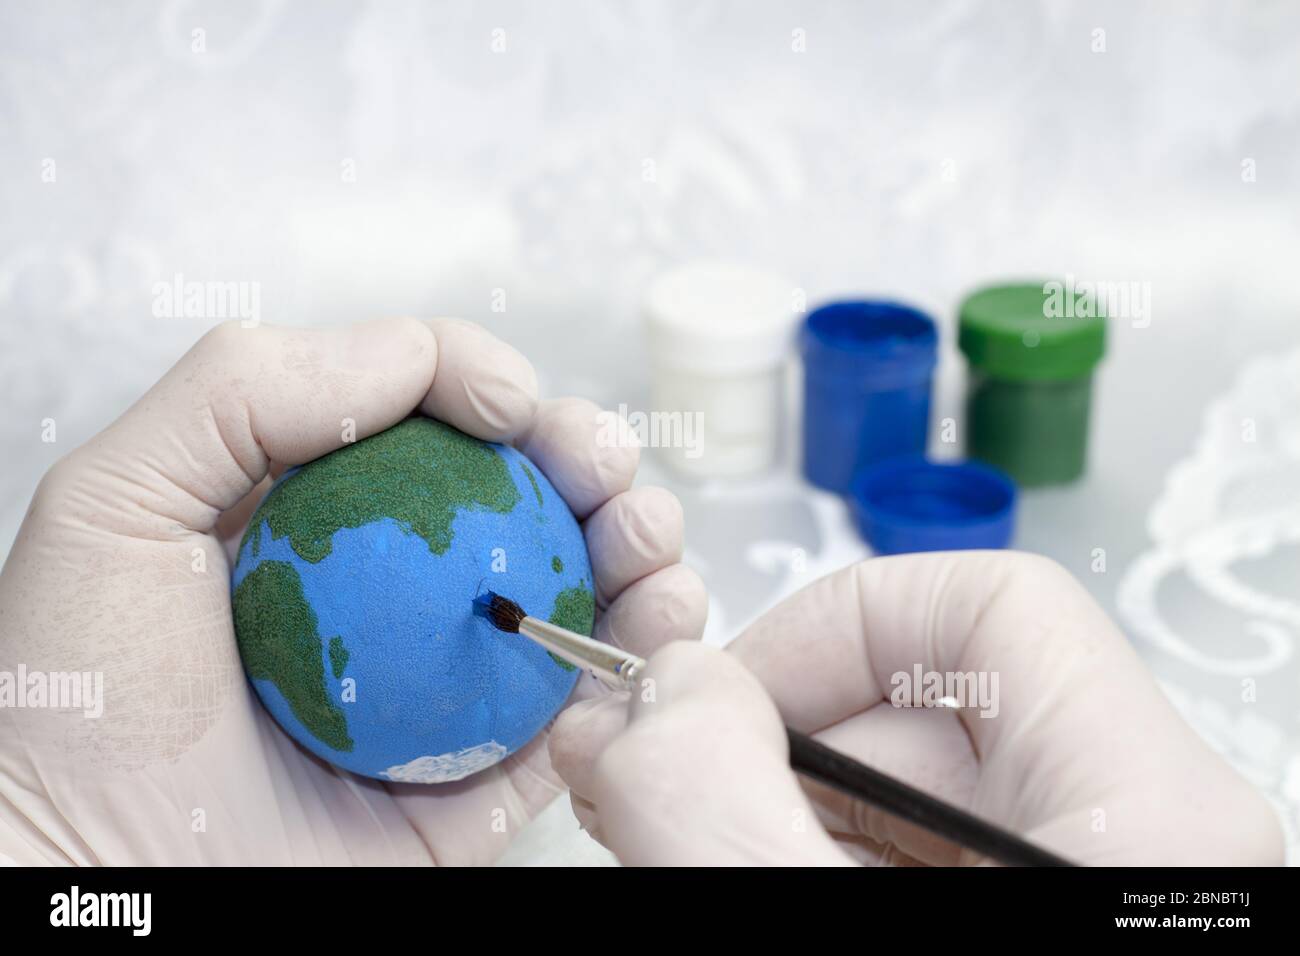 A human hand in white protective gloves painting the planet Earth on a styrofoam ball and in the background there are paints of blue, green and white. Stock Photo